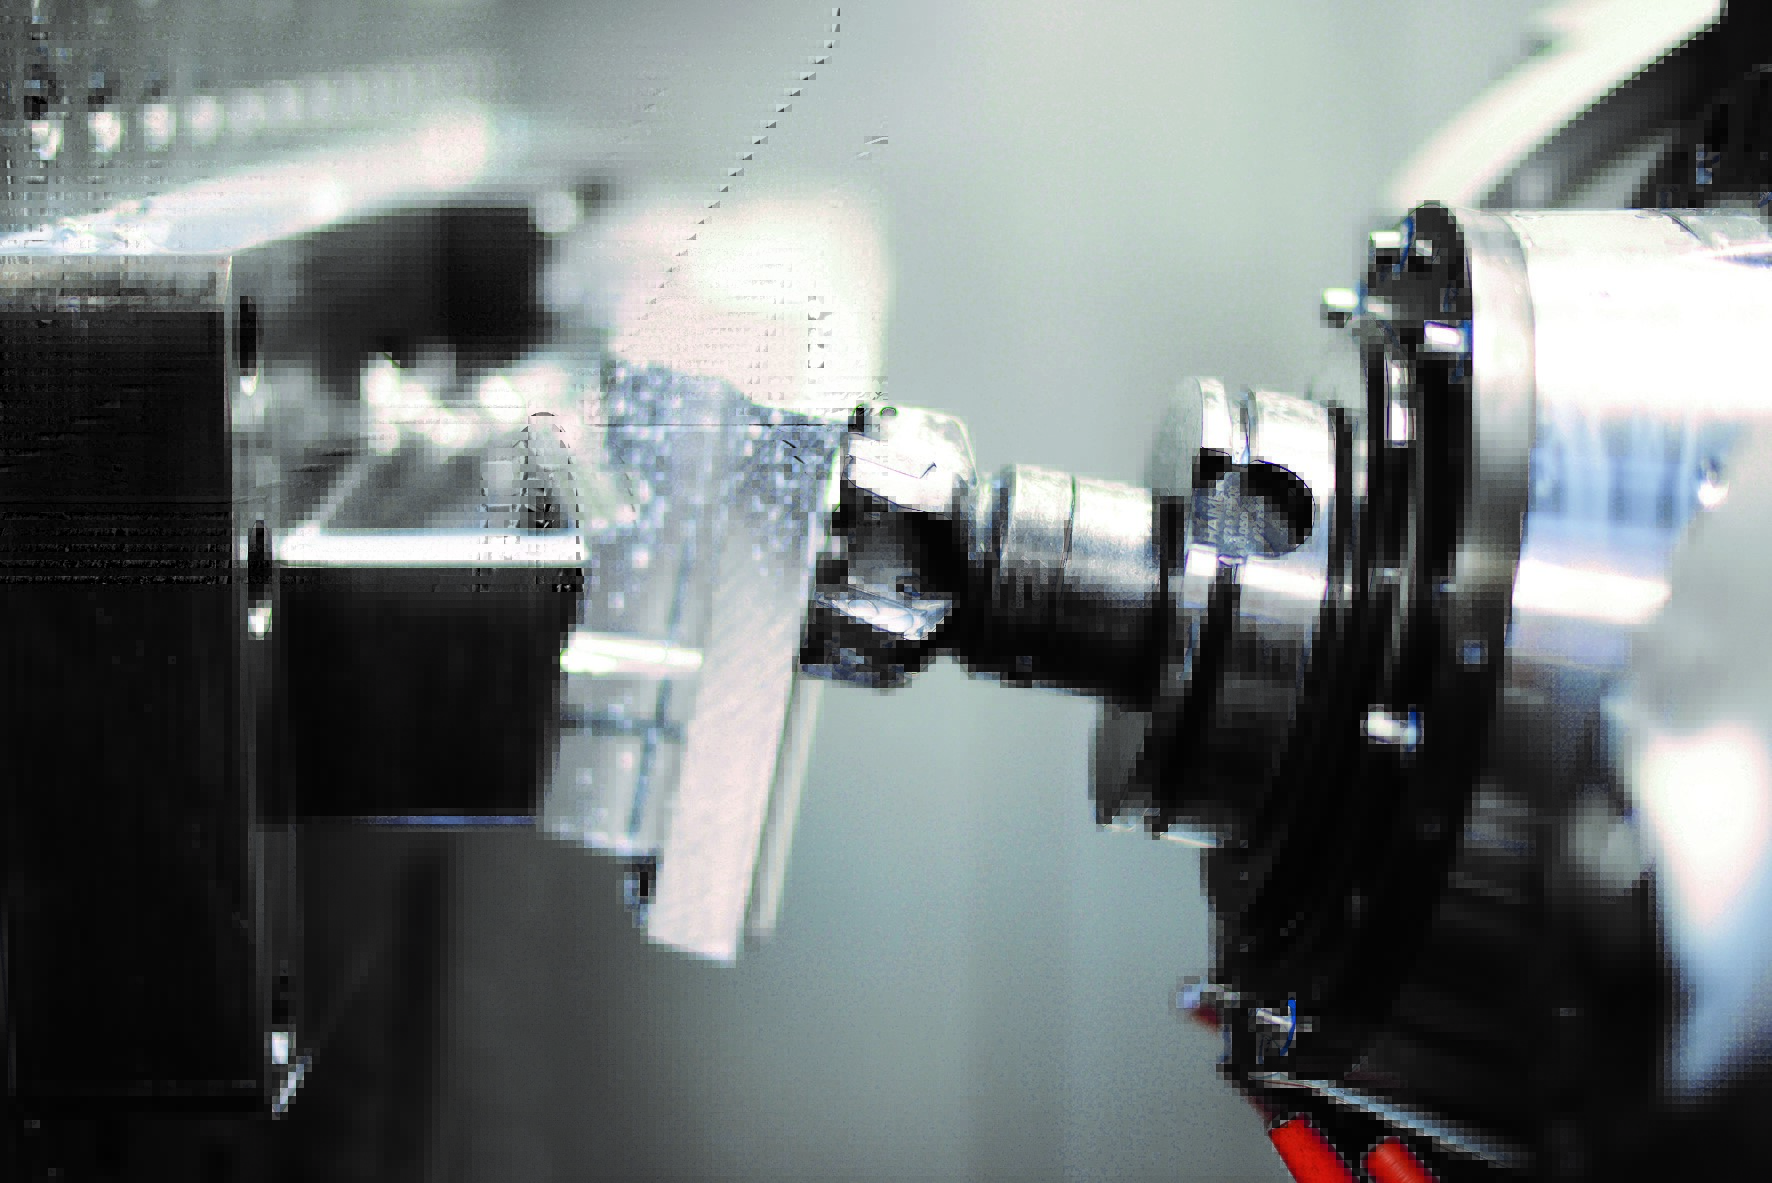 Five-axis machines provide growth opportunities